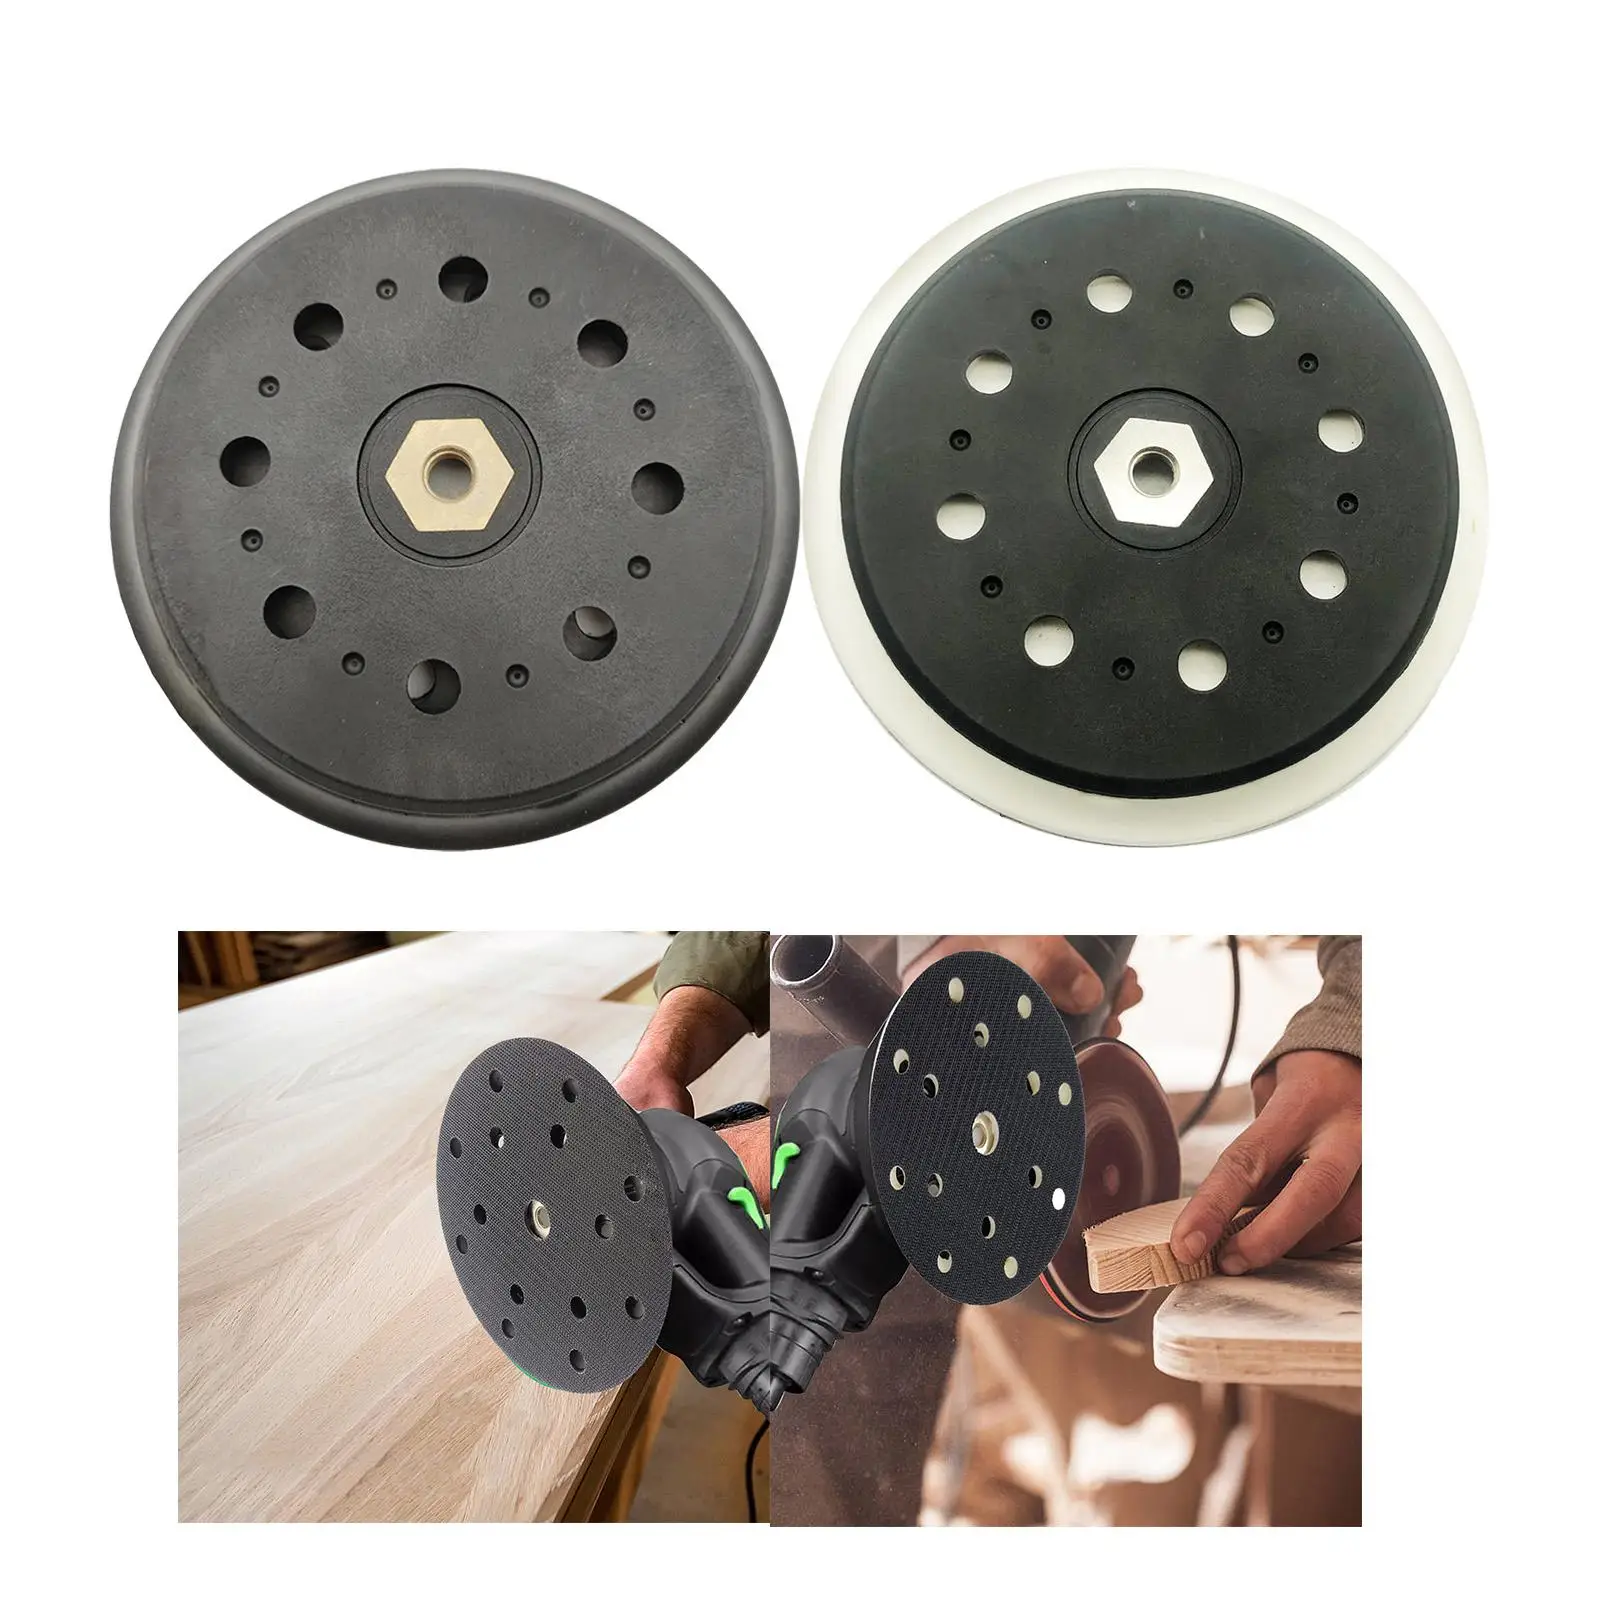 Sanding Backing Plate Pad 6 inch Sander Accessories Backing Grinding Polishing Pad Disc with Mount Hole for Carving for BO6050J